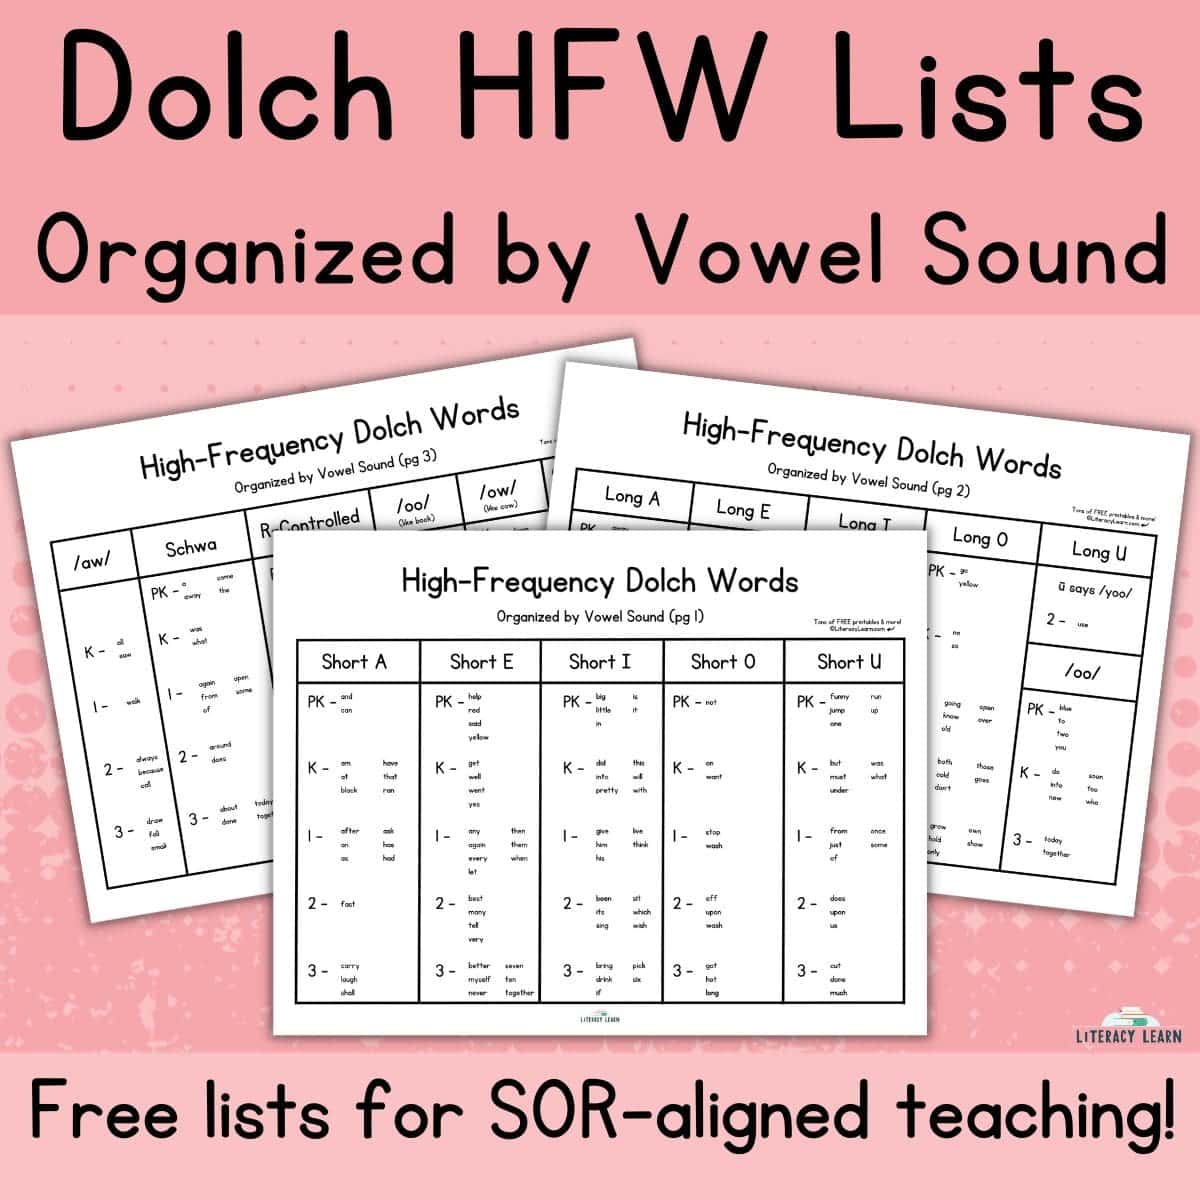 Graphic with title "Dolch HFW Lists Free" and images of three word lists organized by vowel sound.